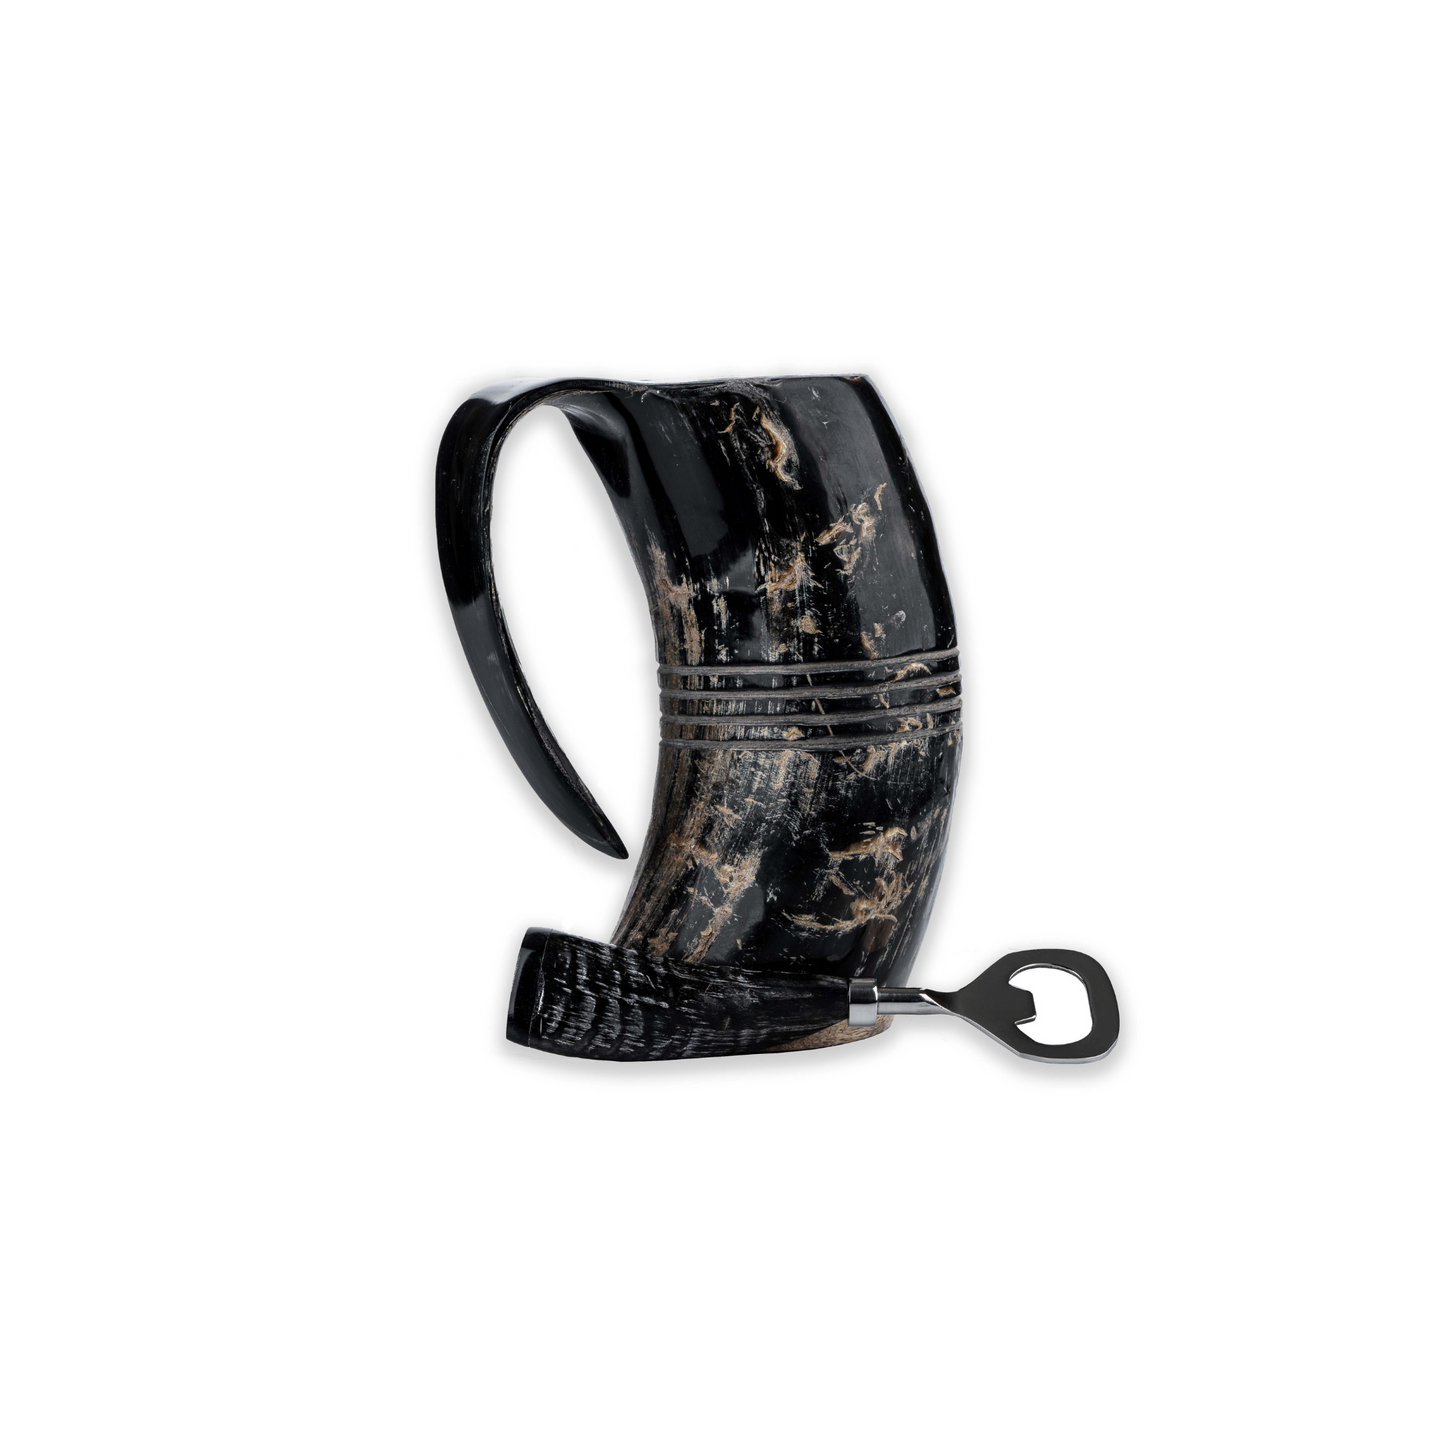 Viking Drinking Horn Mug by Lord’s Rocks | 20-Ounce Beer Stein with Medieval Burlap Jute Bag and Bottle Opener | Authentic Handmade Oxhorn Tankard for Mead and Wine Gifts